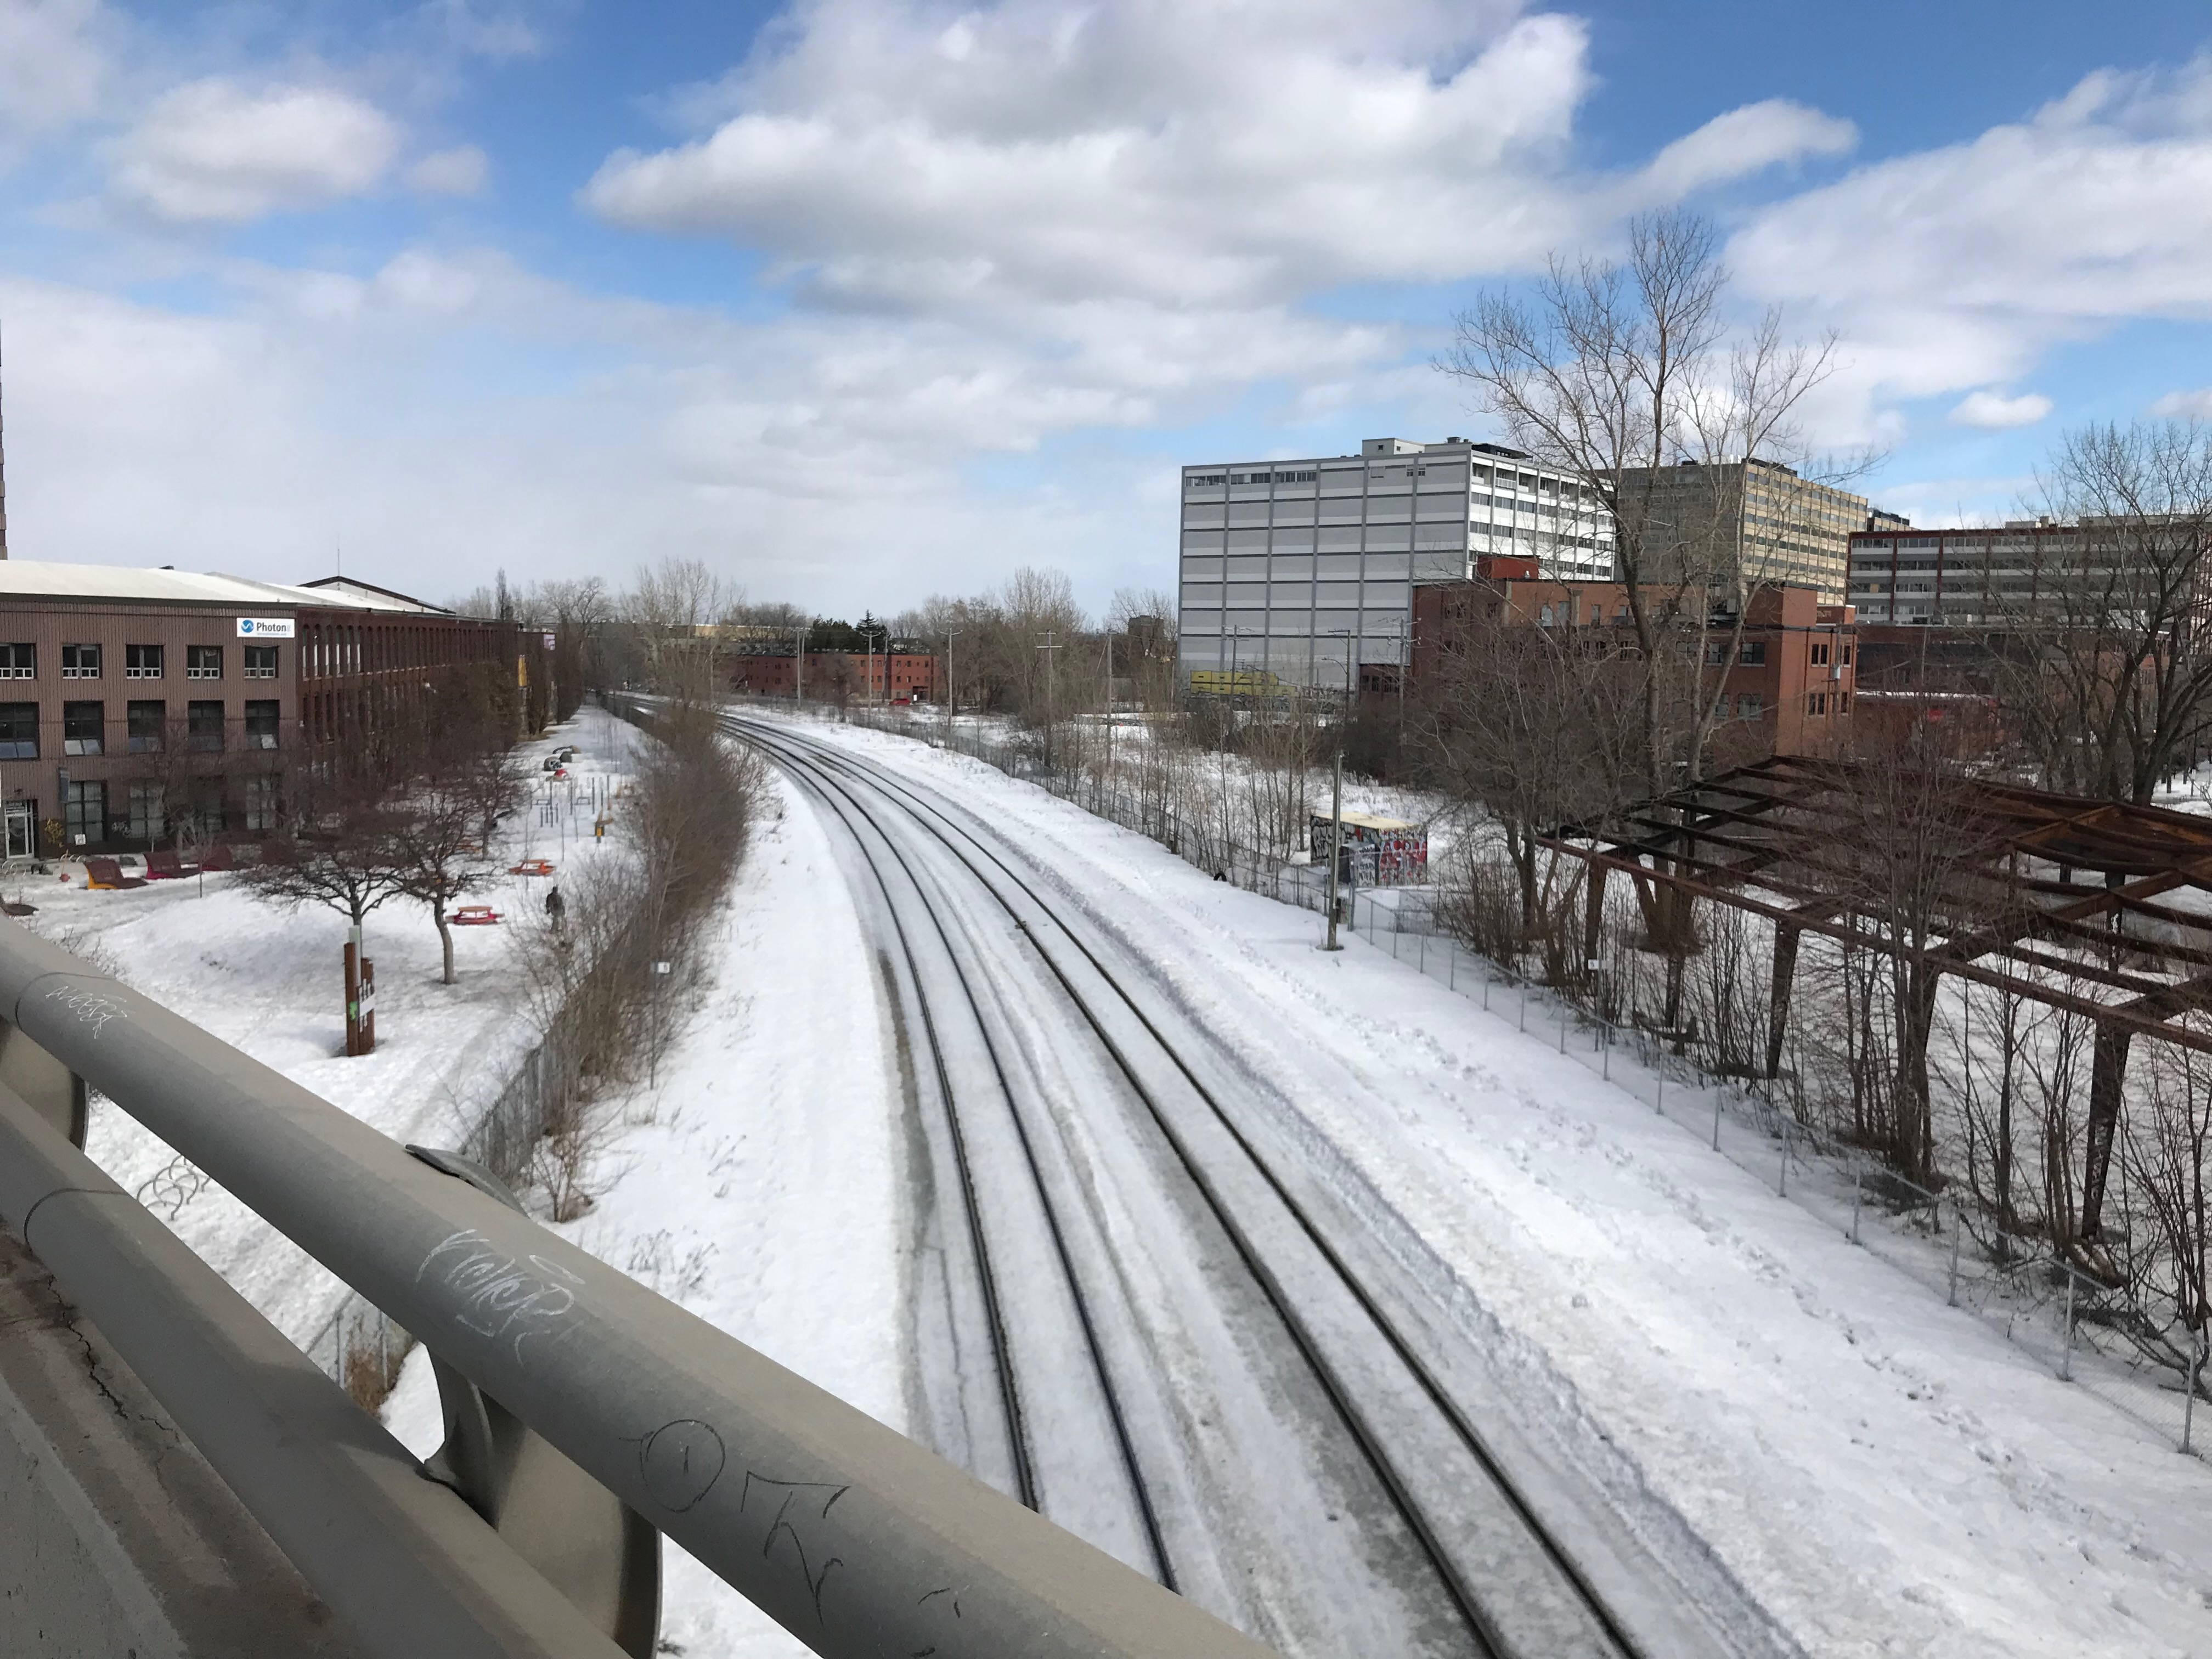 a photo of some snowy traintracks, a blue cloudy ski, and buildings.